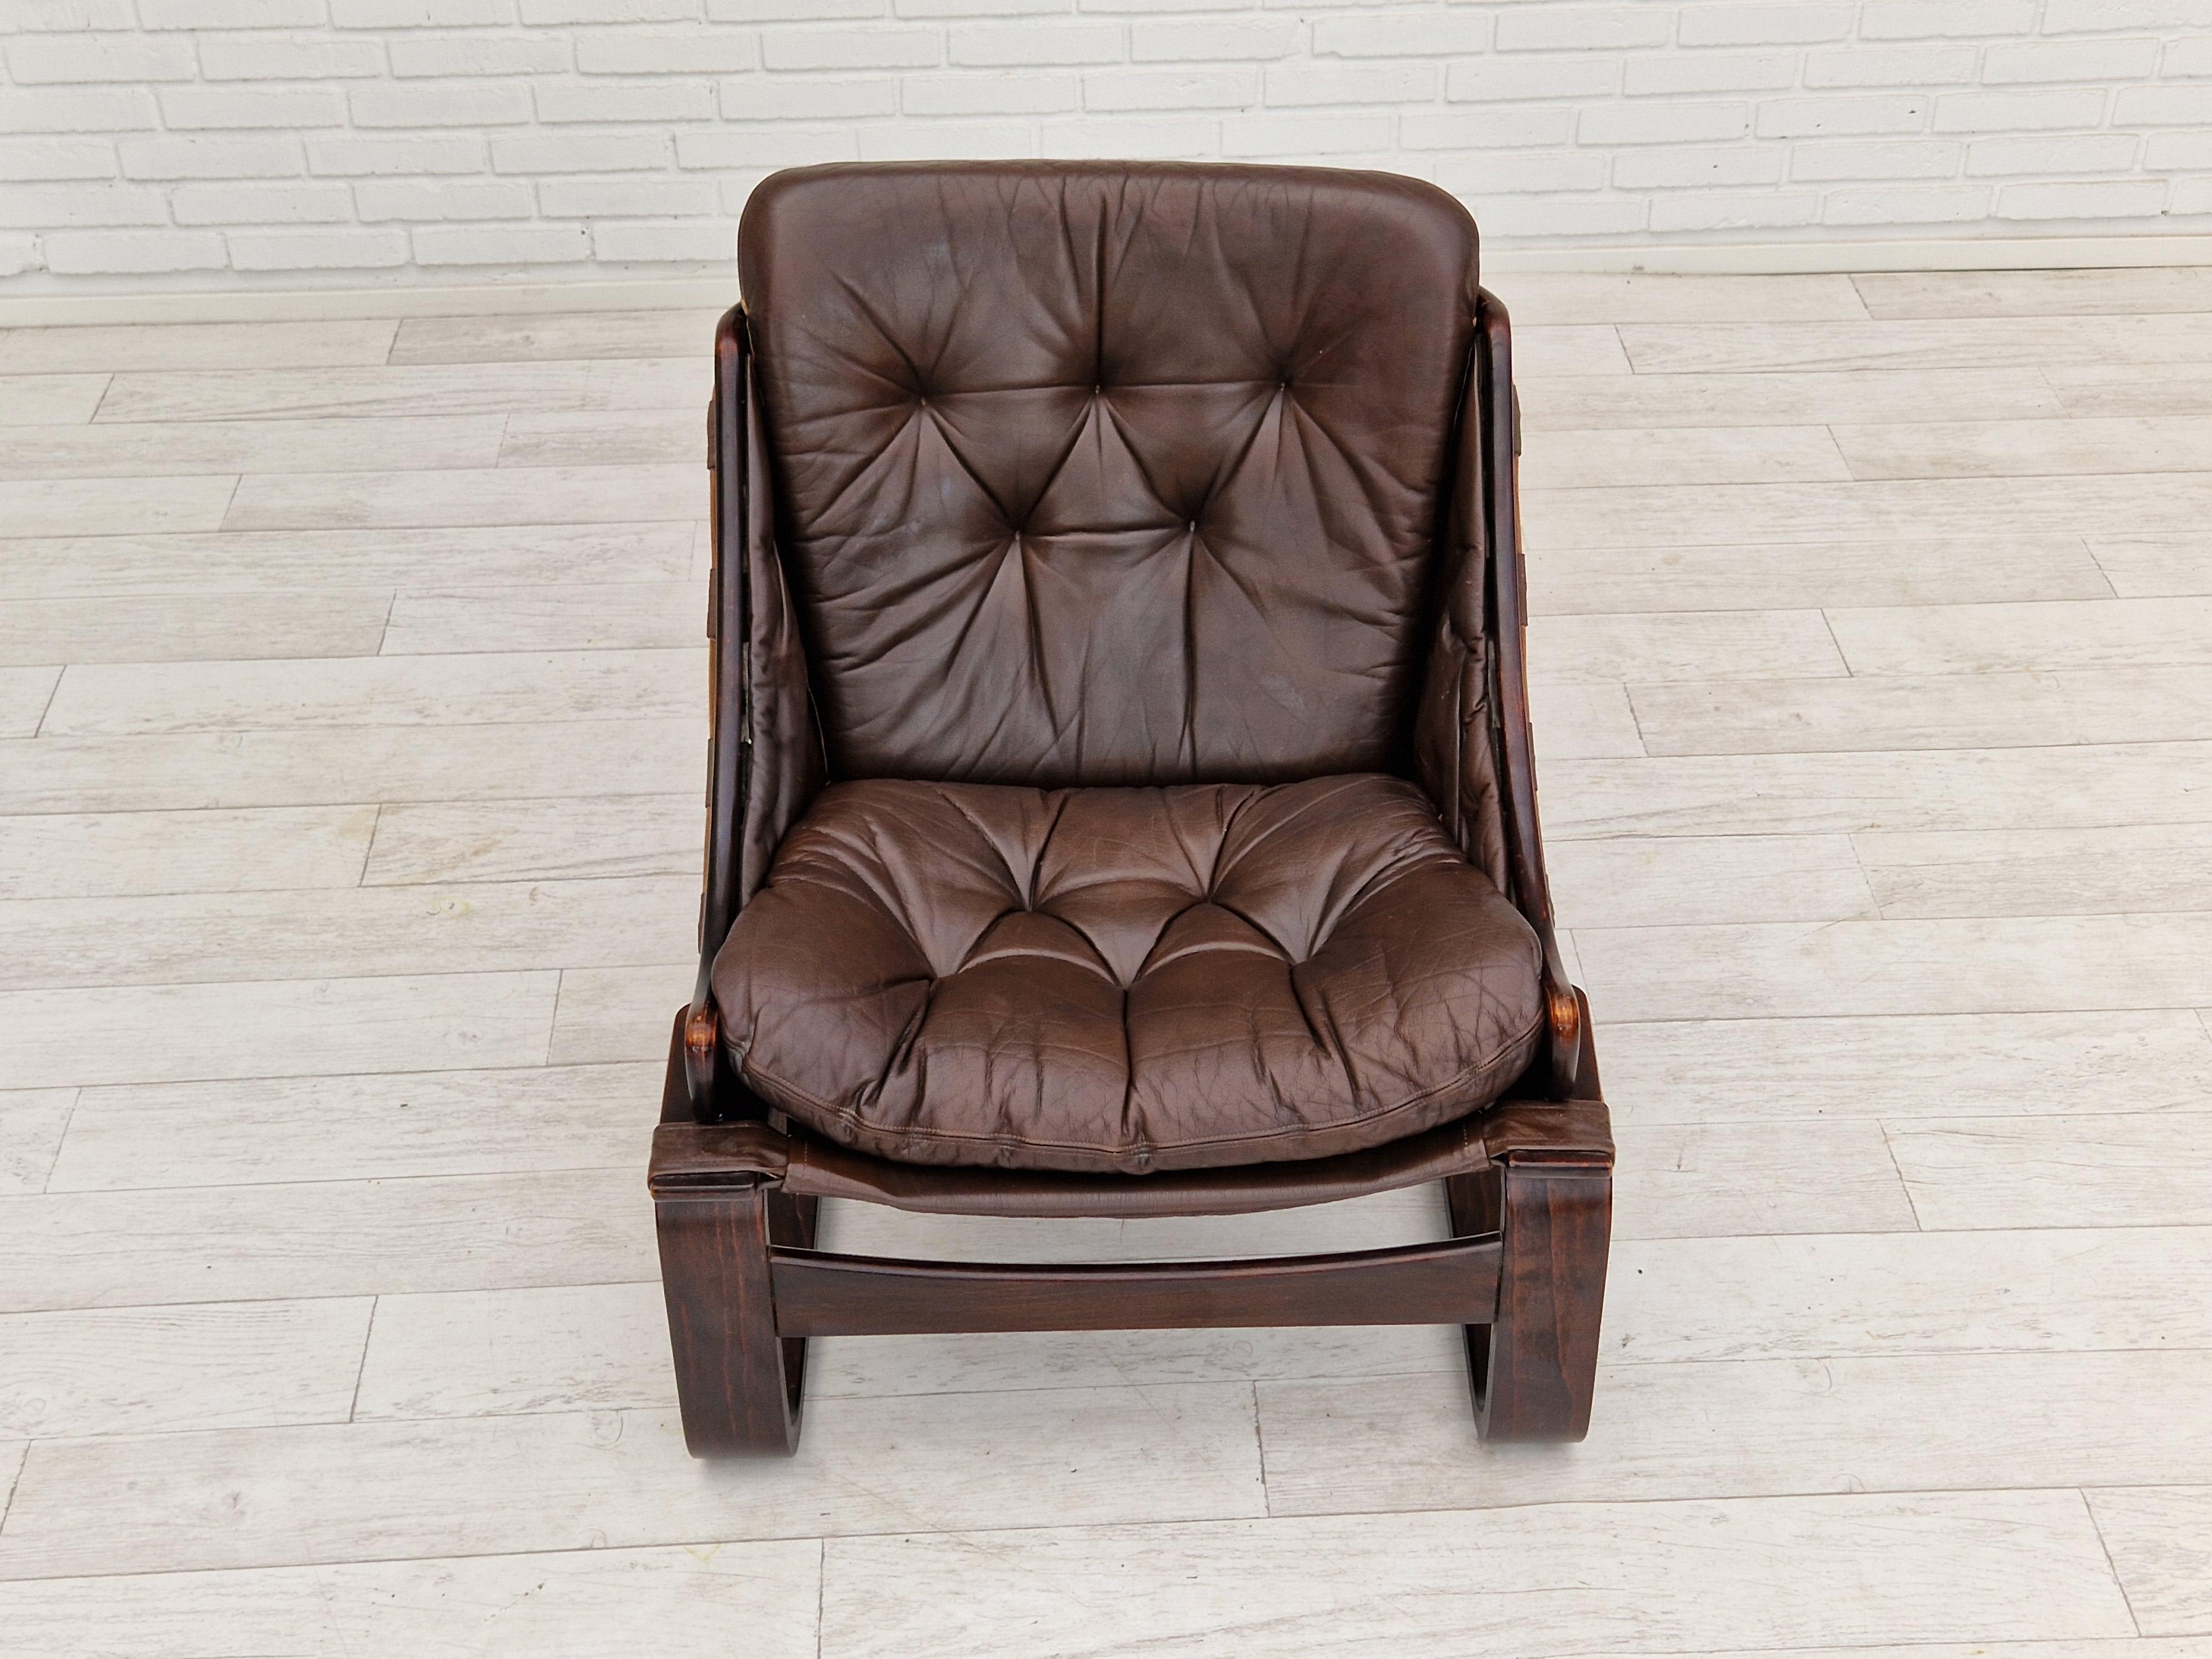 1970s, Brown Leather Lounge Chair by Ake Fribytter for Nelo Sweden For Sale 2